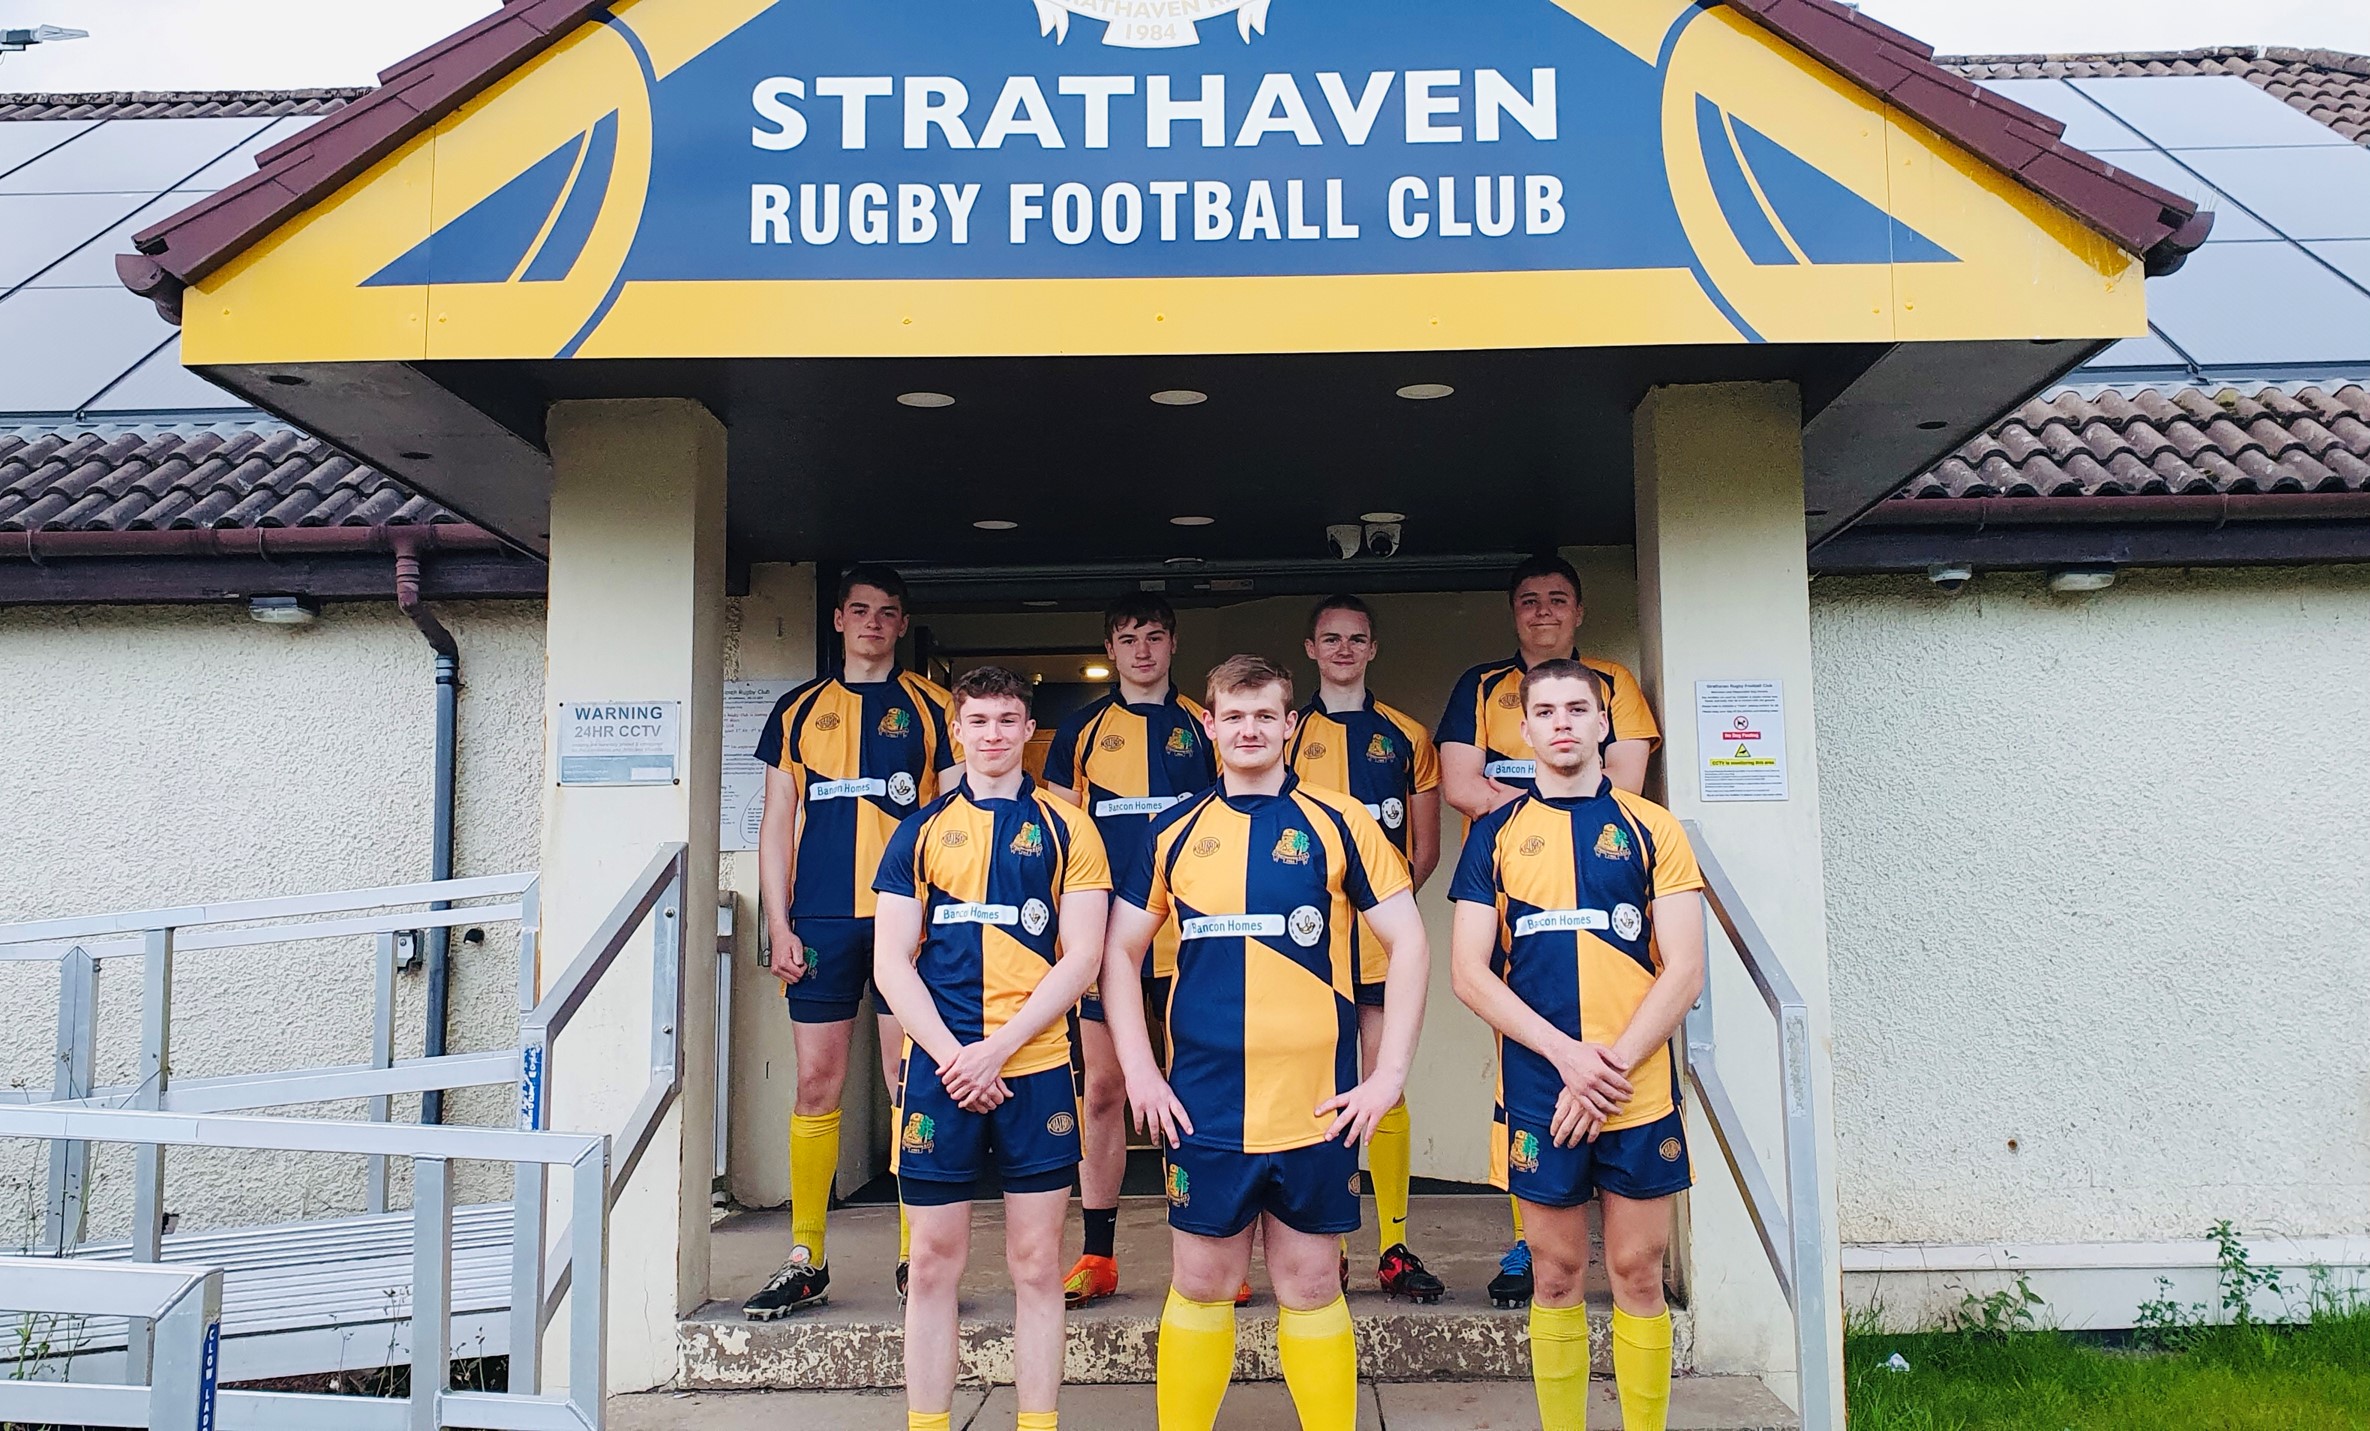 Bancon Homes teams up with Strathaven Rugby Football Club